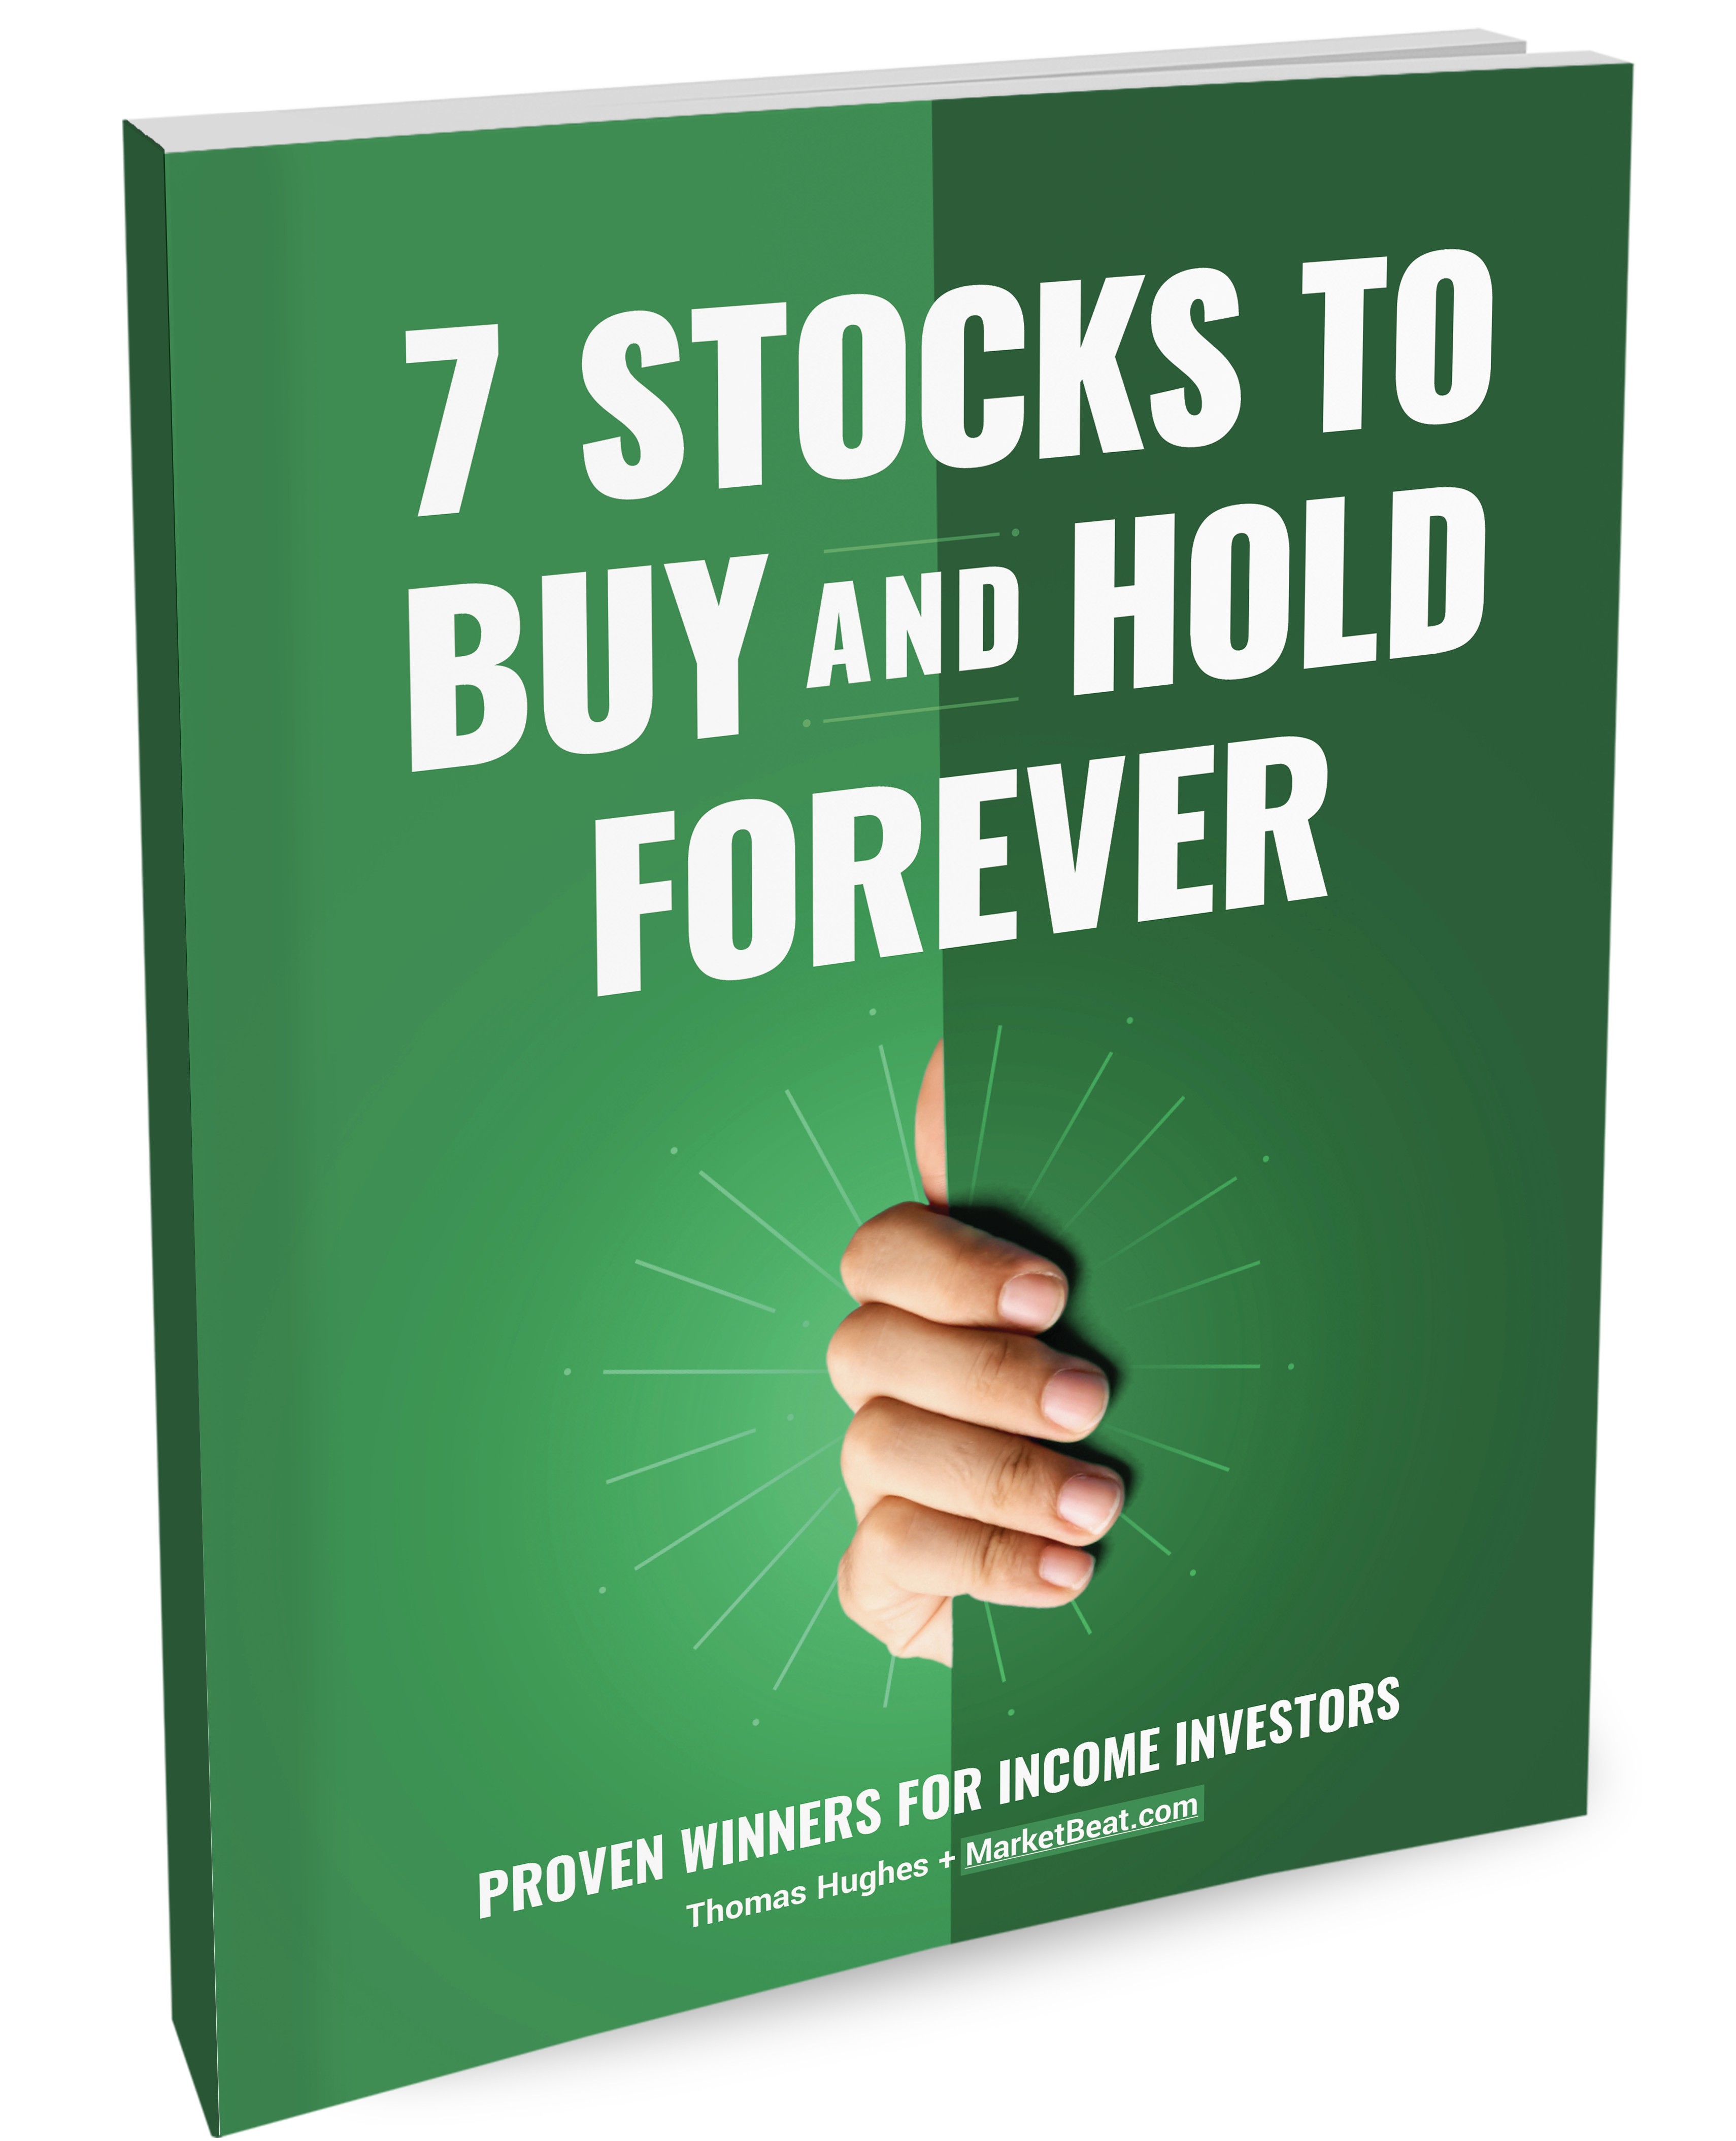 7 Stocks to Buy and Hold Forever